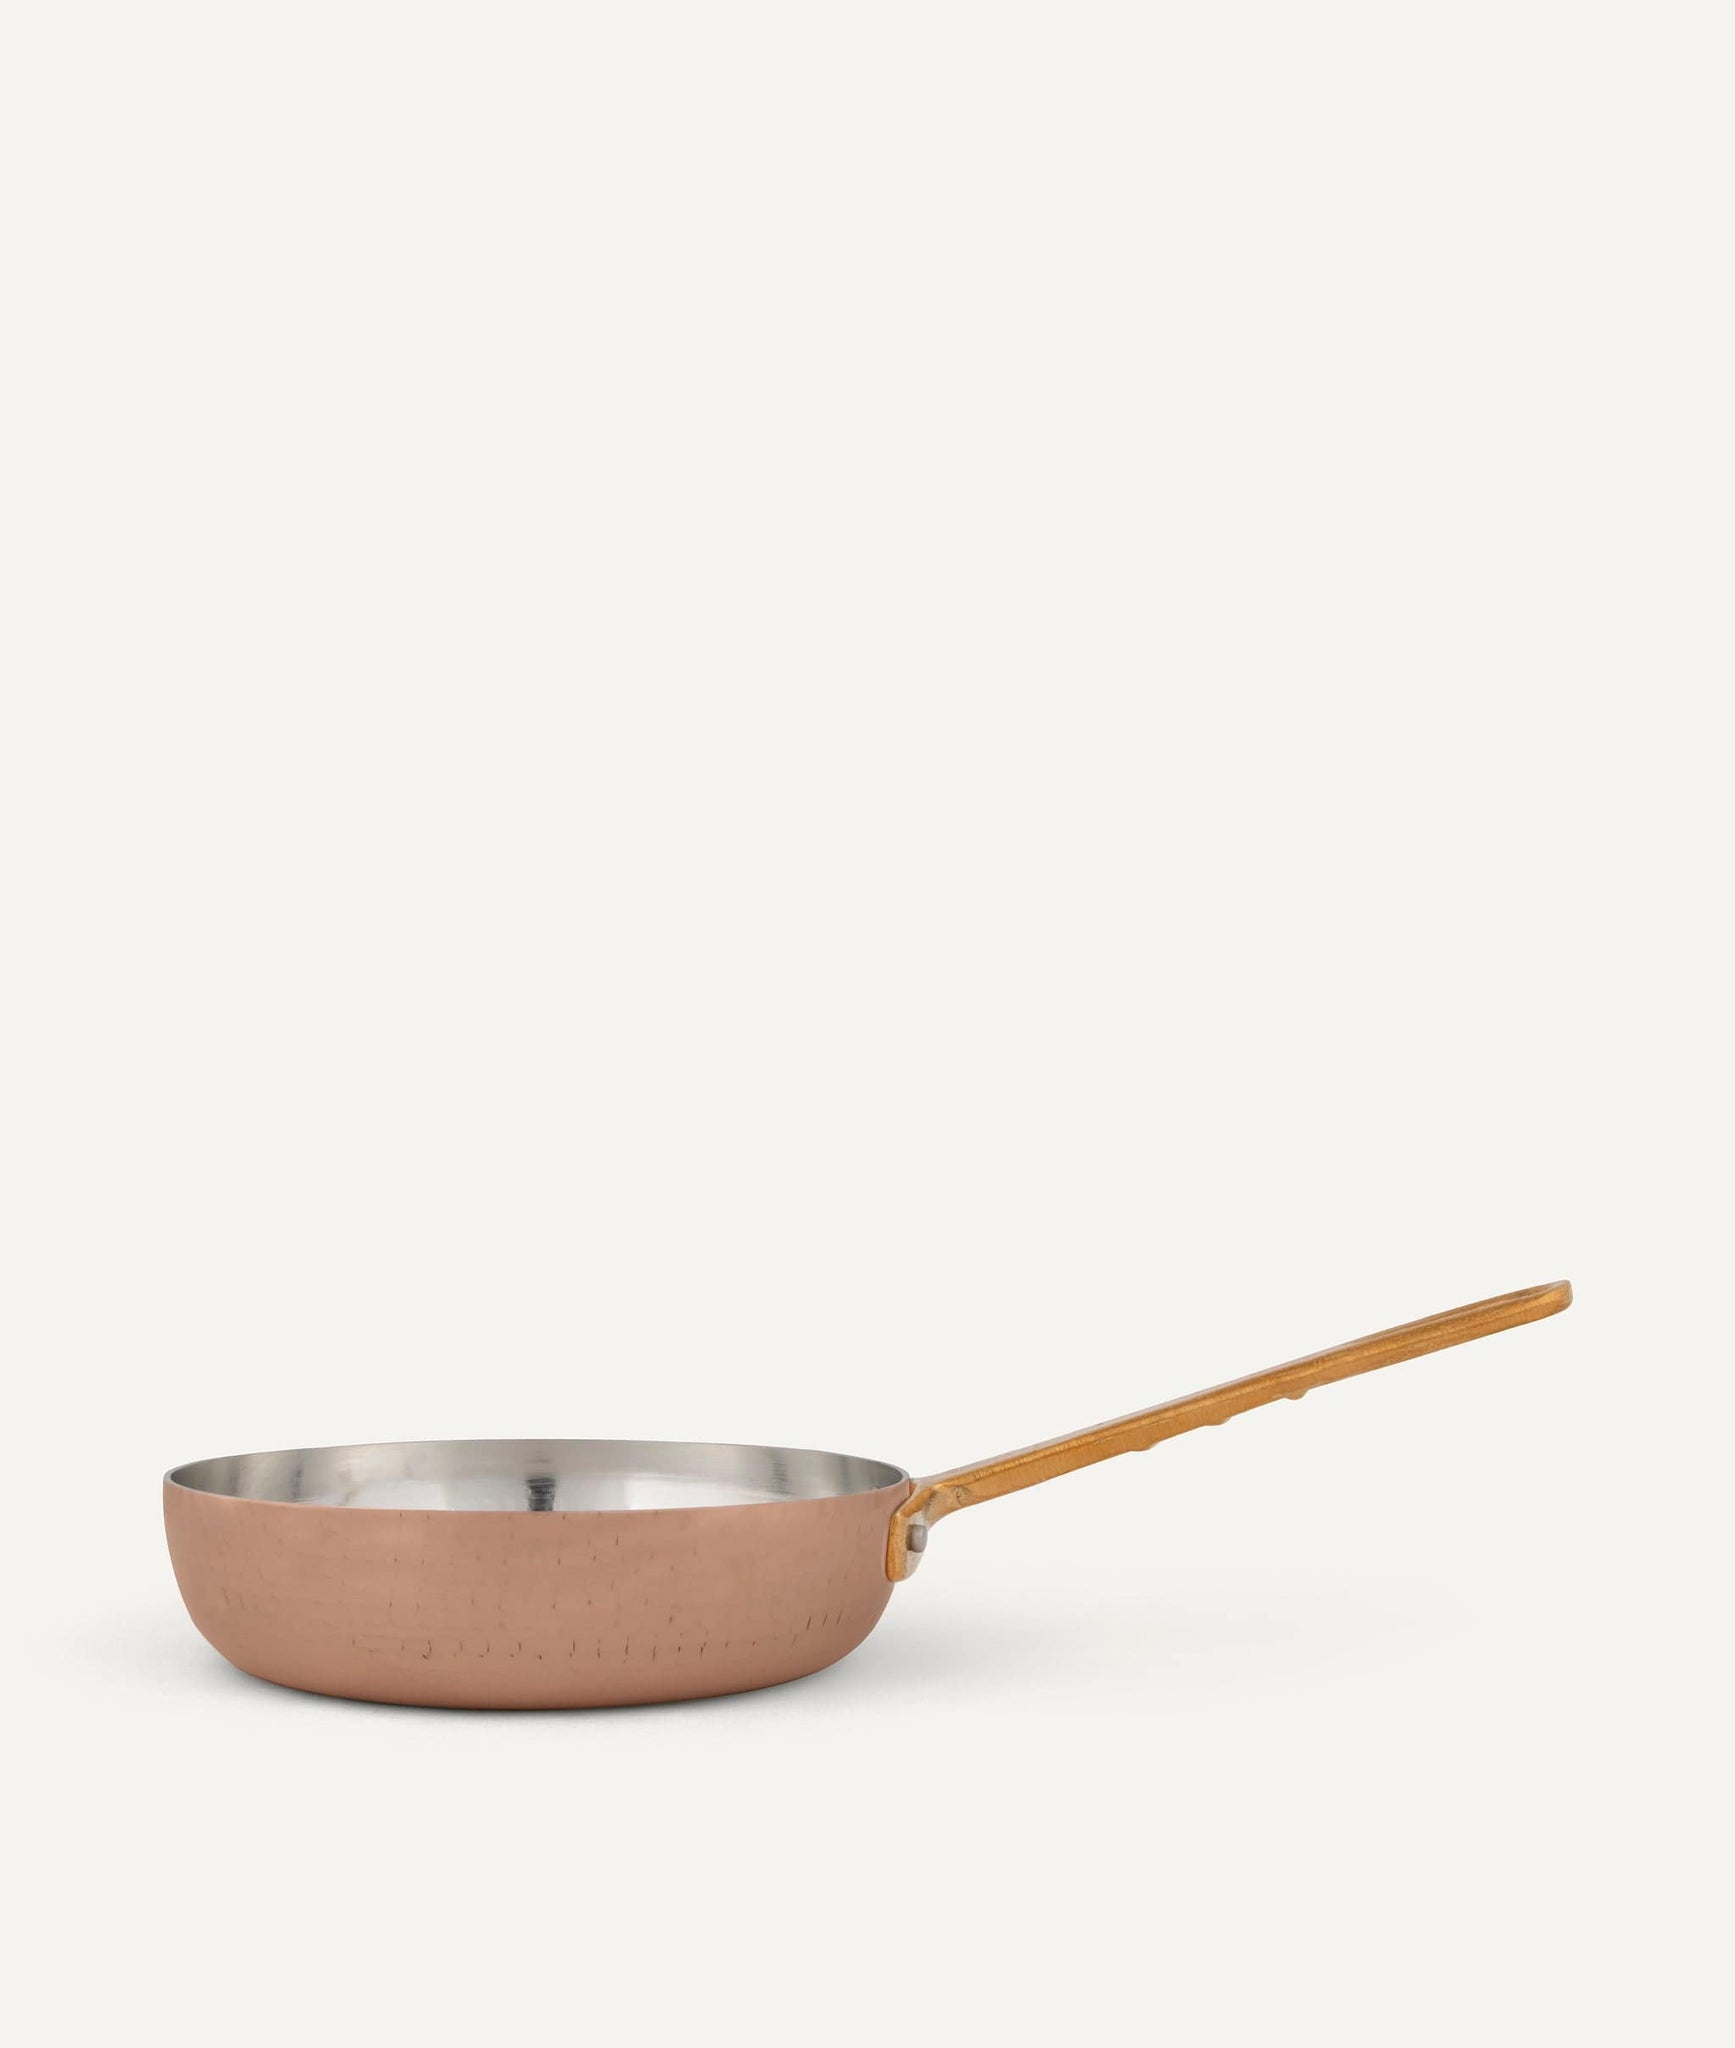 Frying pan in tinned copper